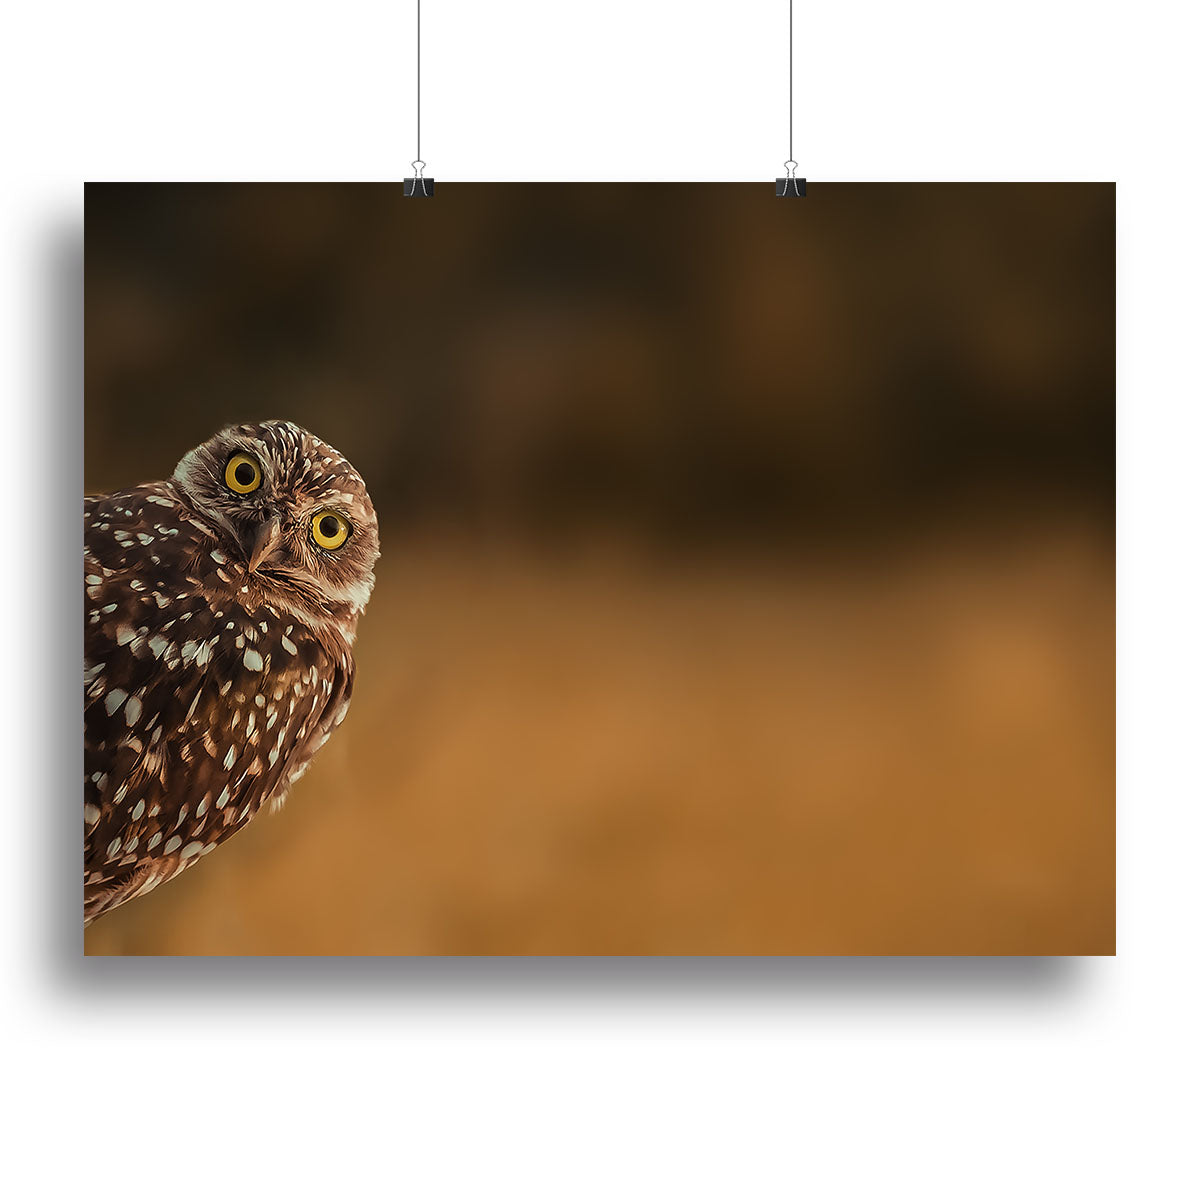 Hi there Canvas Print or Poster - 1x - 2